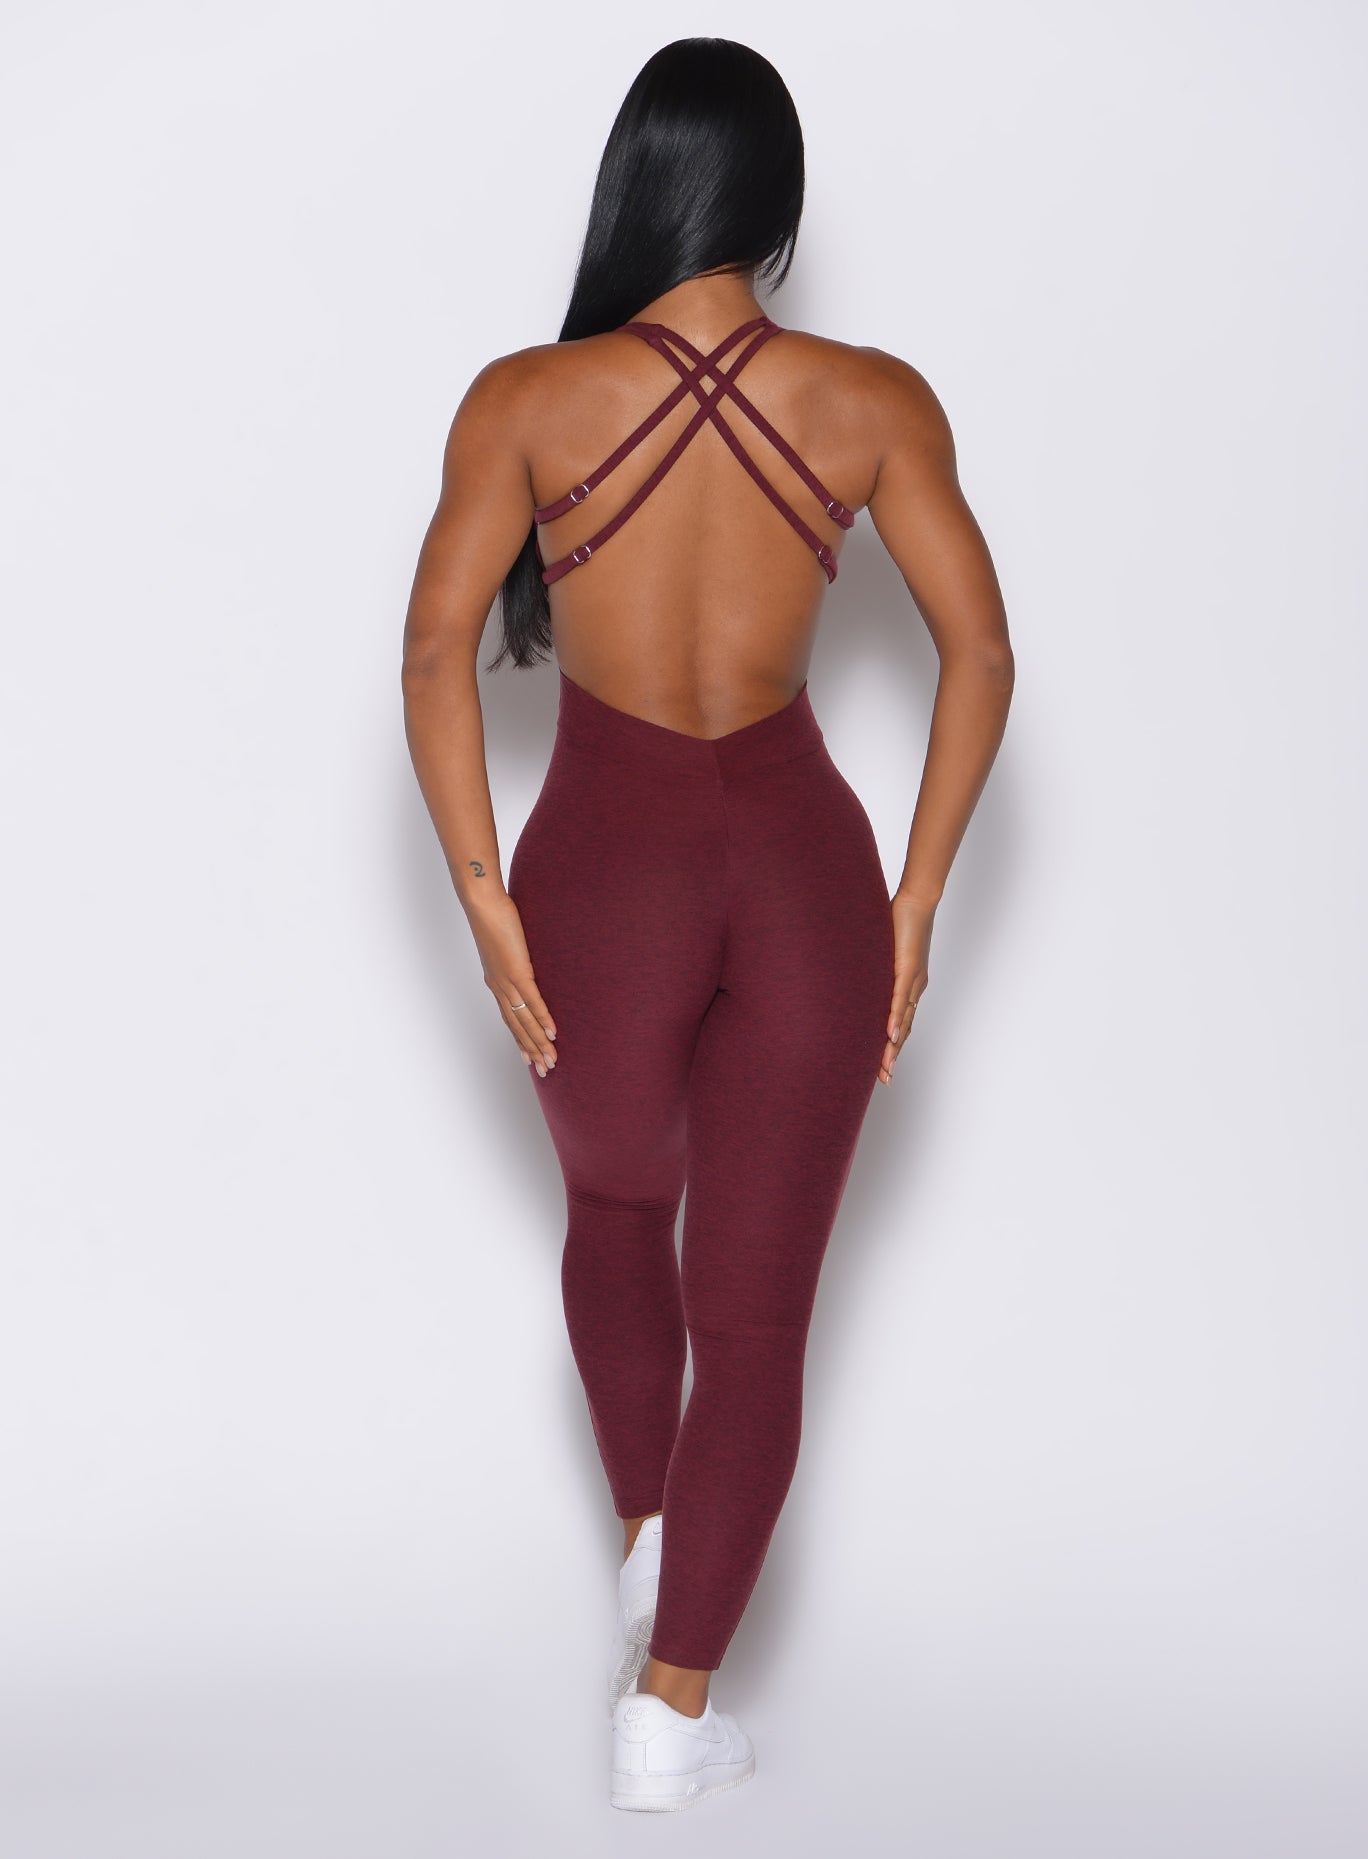 Back profile view of a model wearing our bombshell bodysuit in red wine color